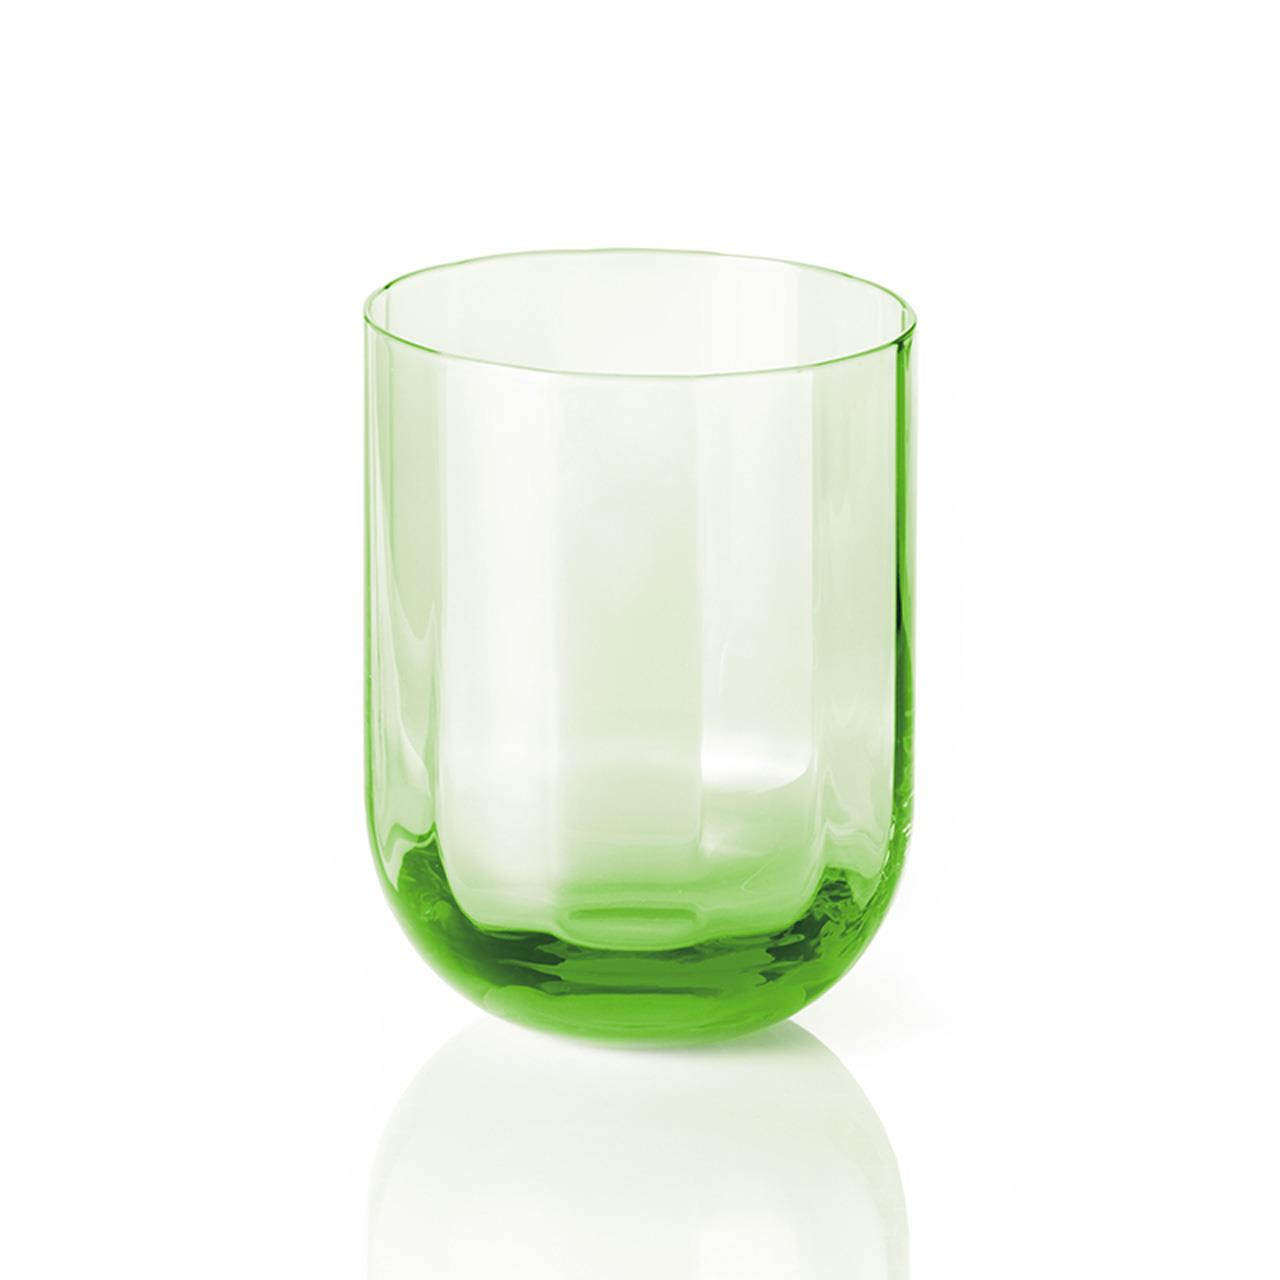 29 Recommended Old Glass Vases 2024 free download old glass vases of dibbern rotondo optic glass 0 25 l green franzen dac2bcsseldorf pertaining to dibbern rotondo optic glass 0 25 l green franzen dac2bcsseldorf onlineshop